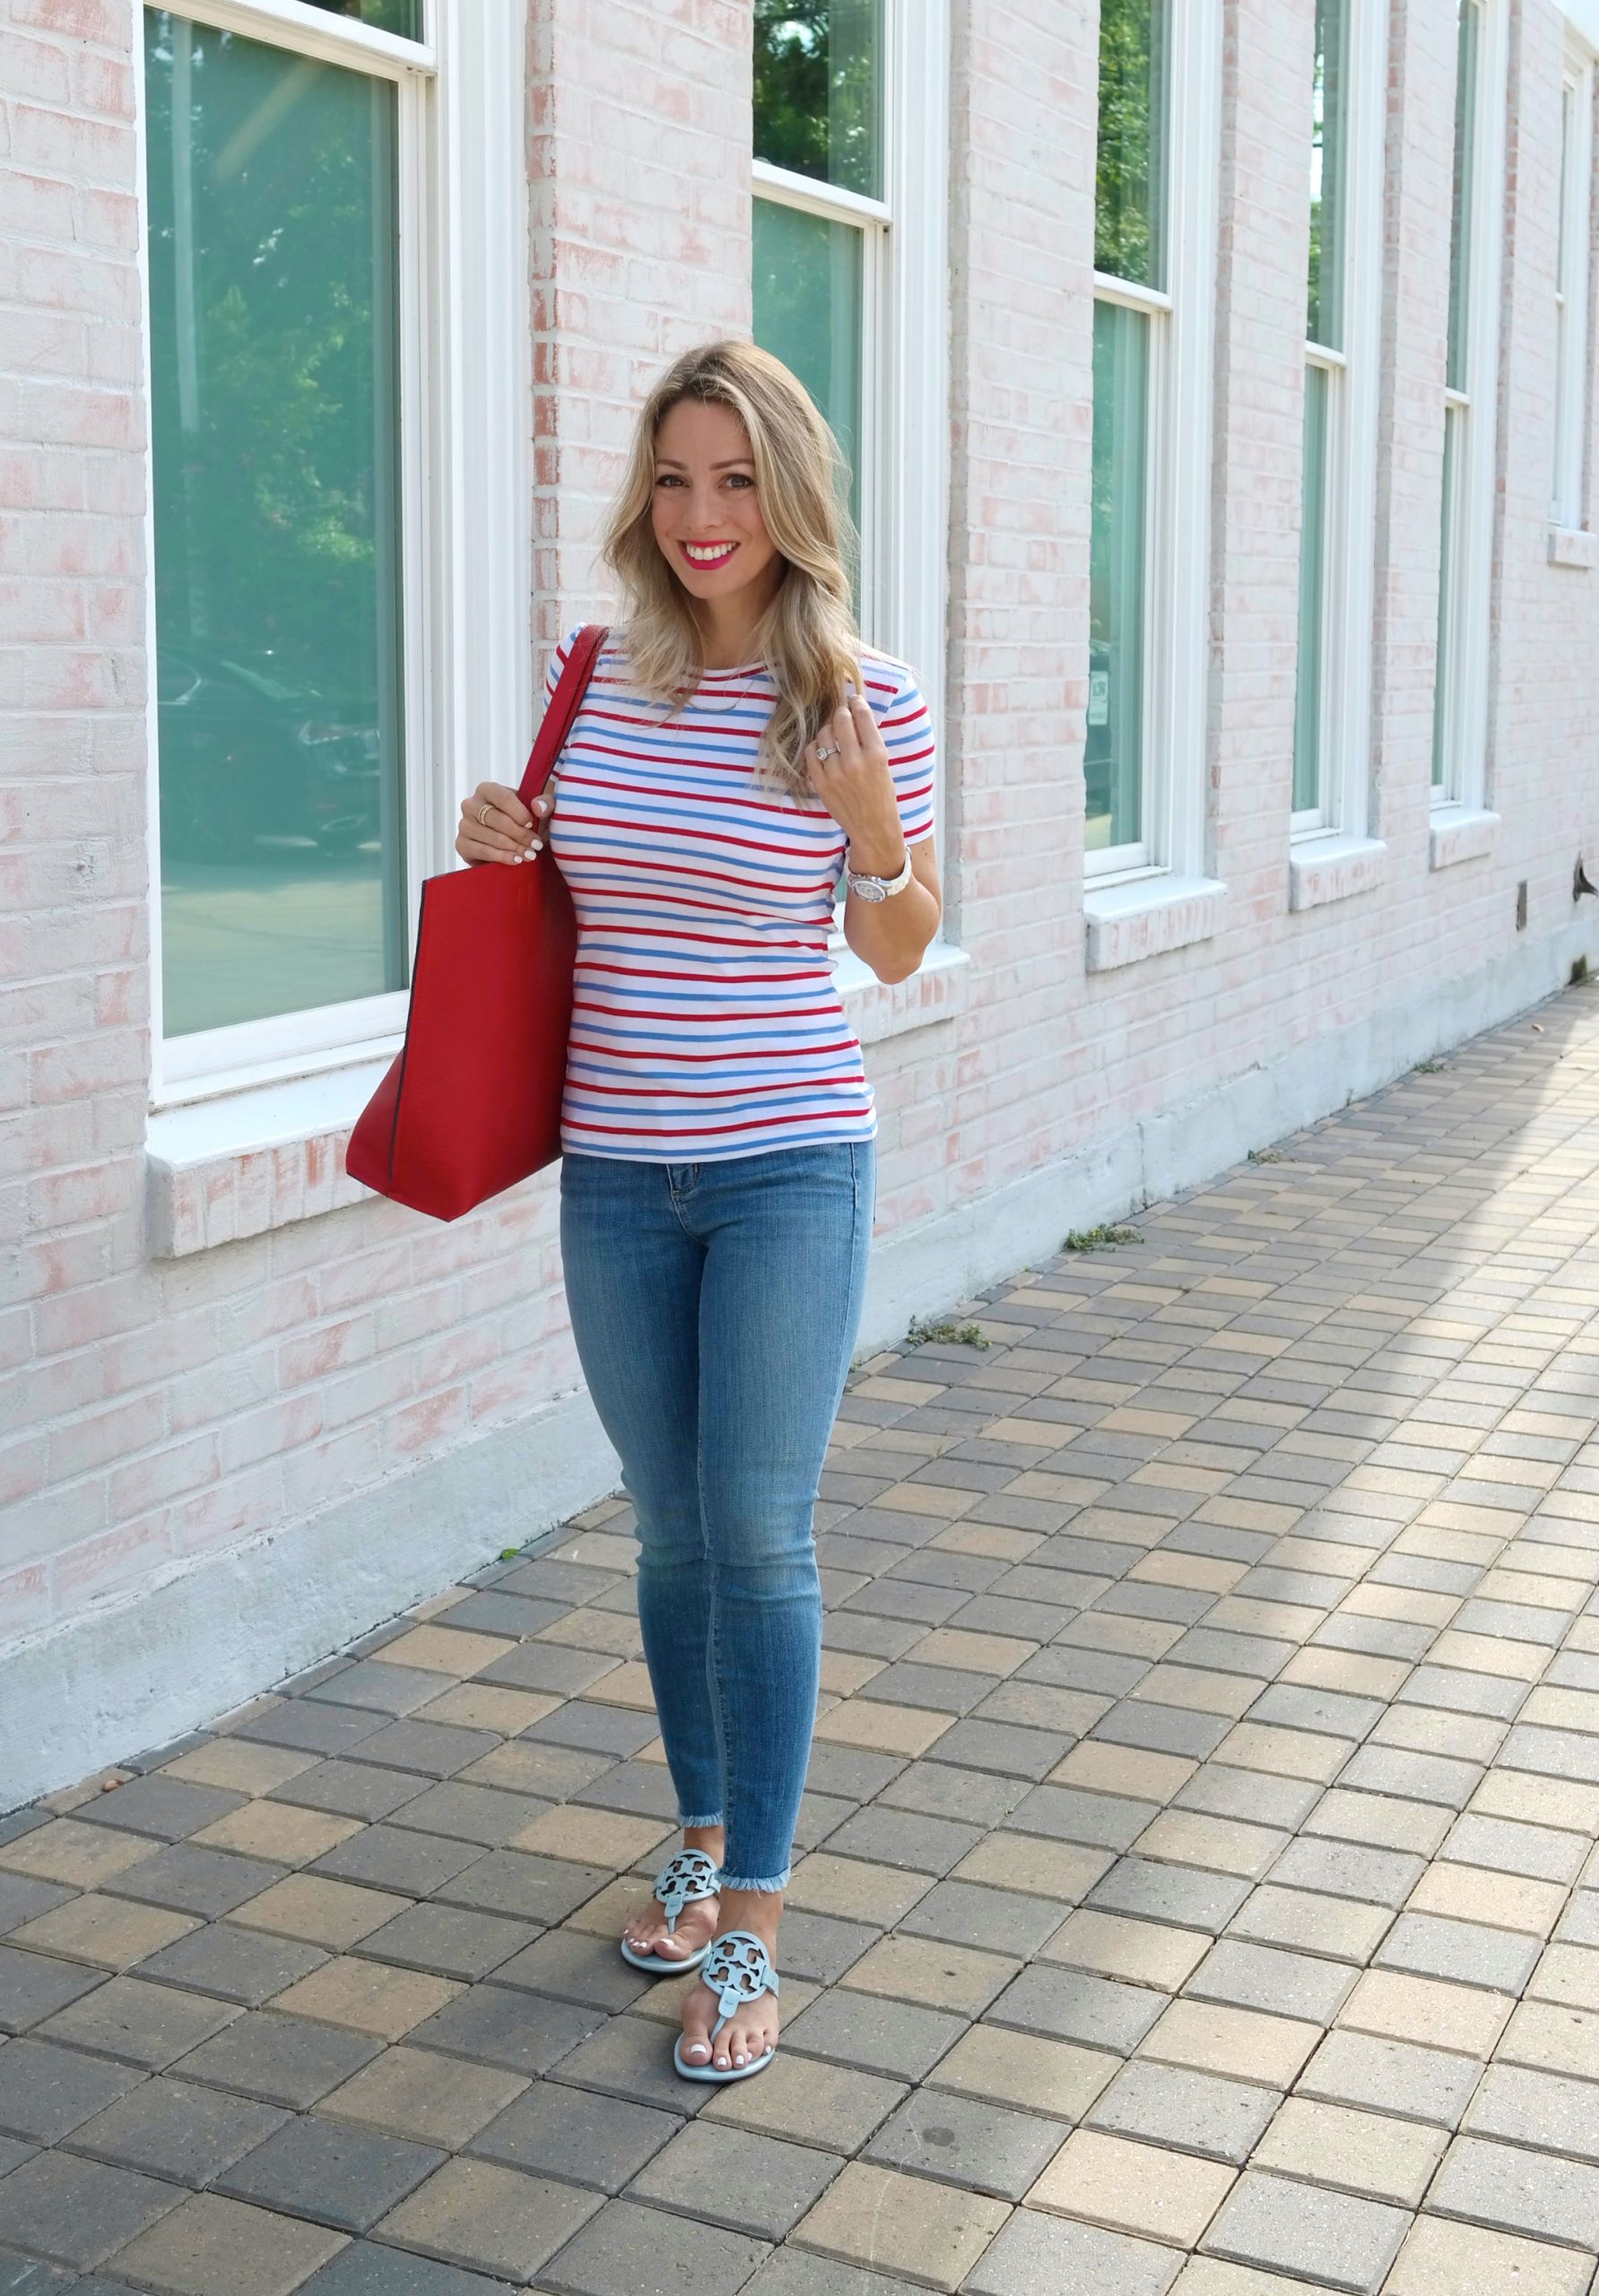 4th Of July Outfit Ideas
 Cute Fourth of July Outfit Ideas